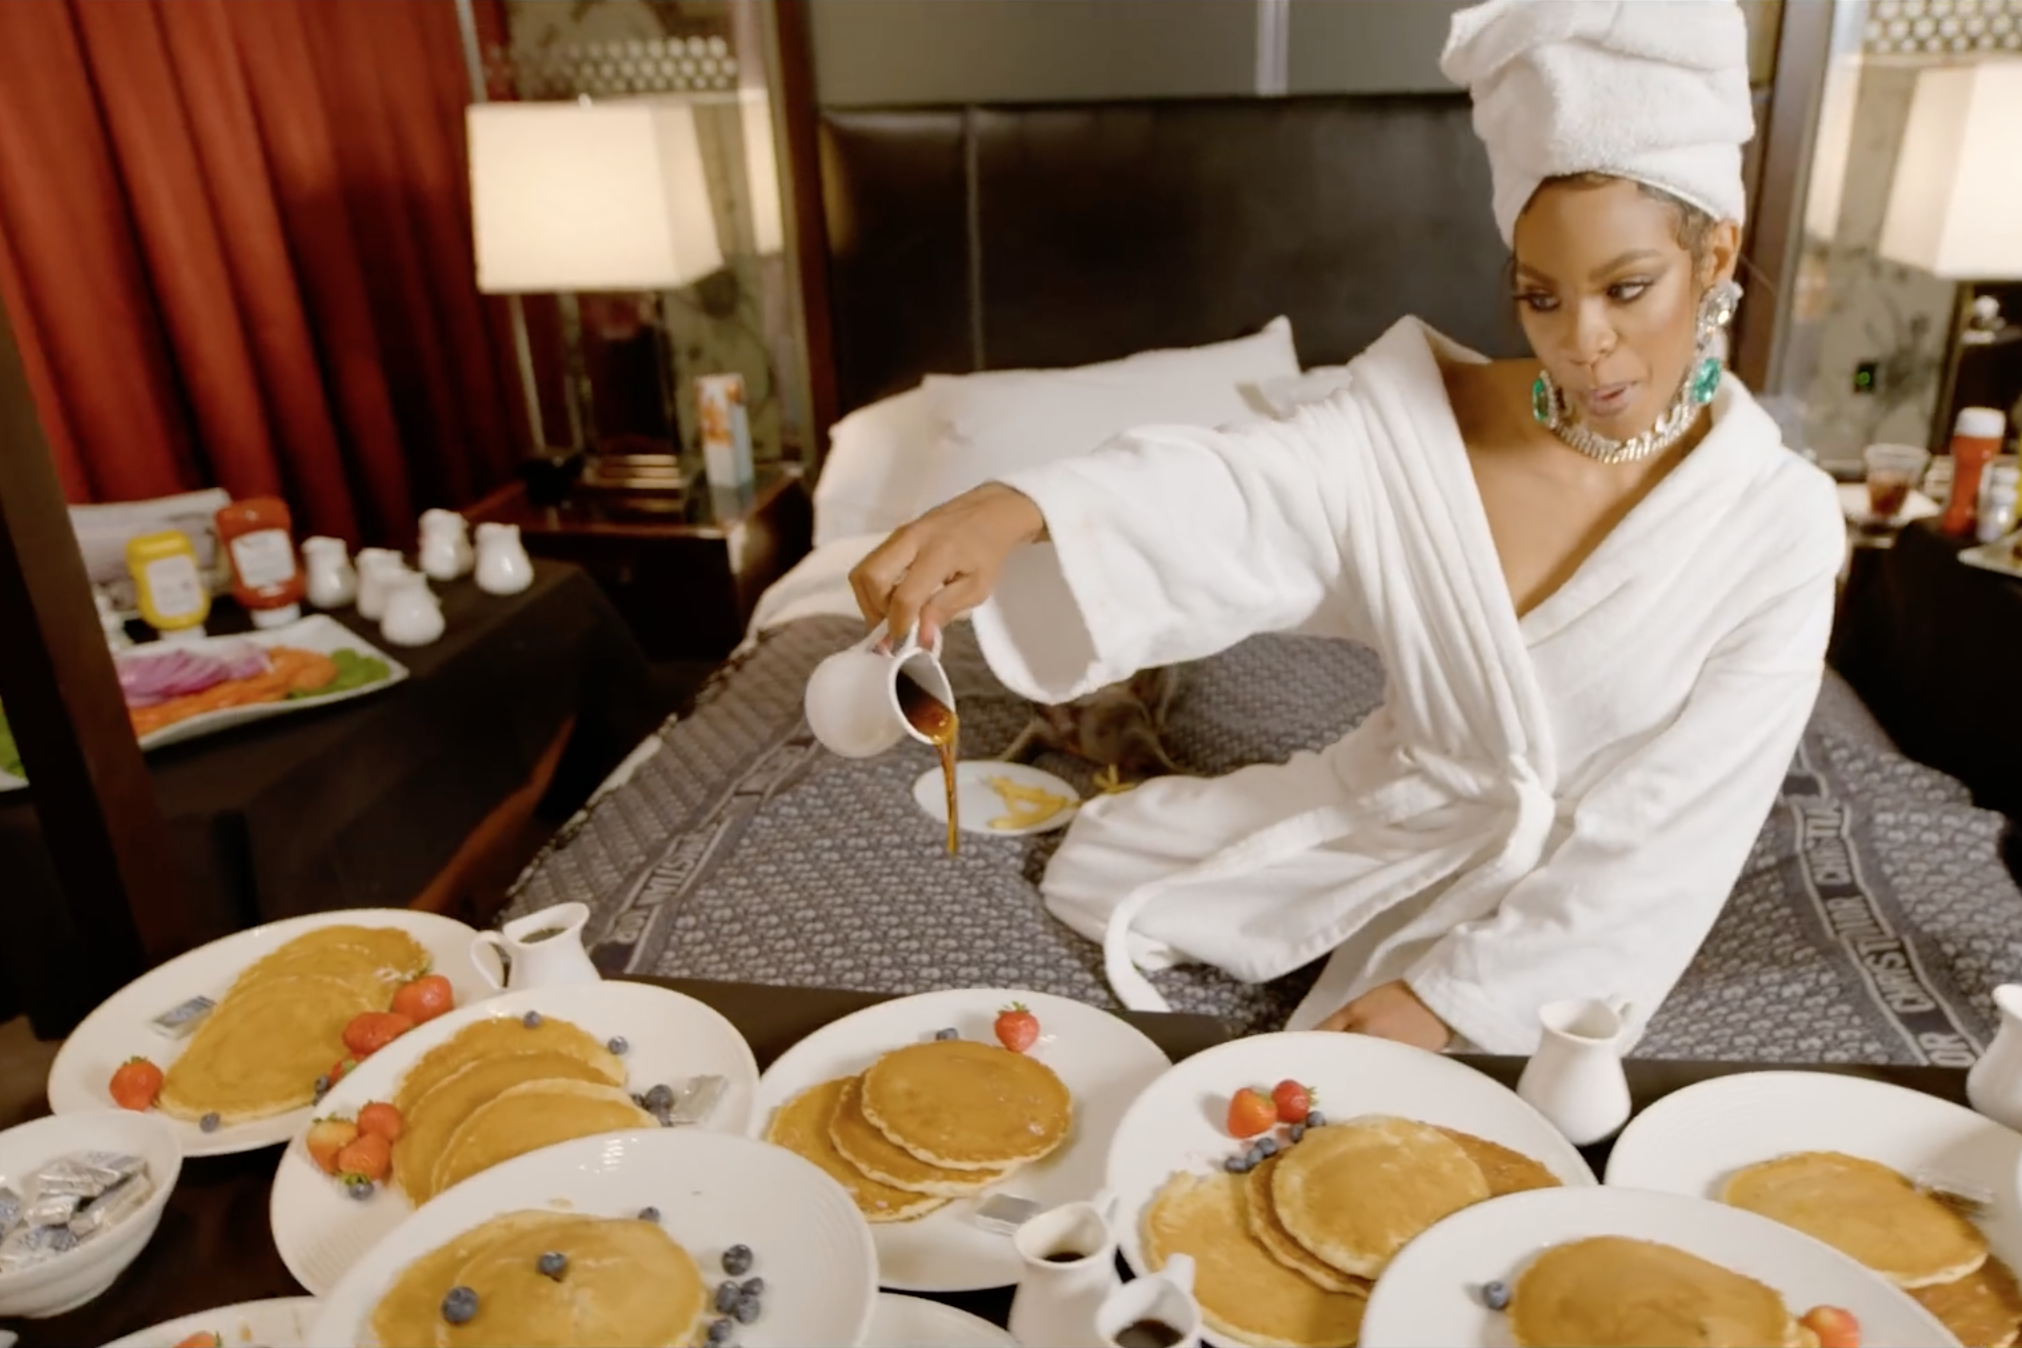 2019 Was a Good Year for Pancakes in Music Videos